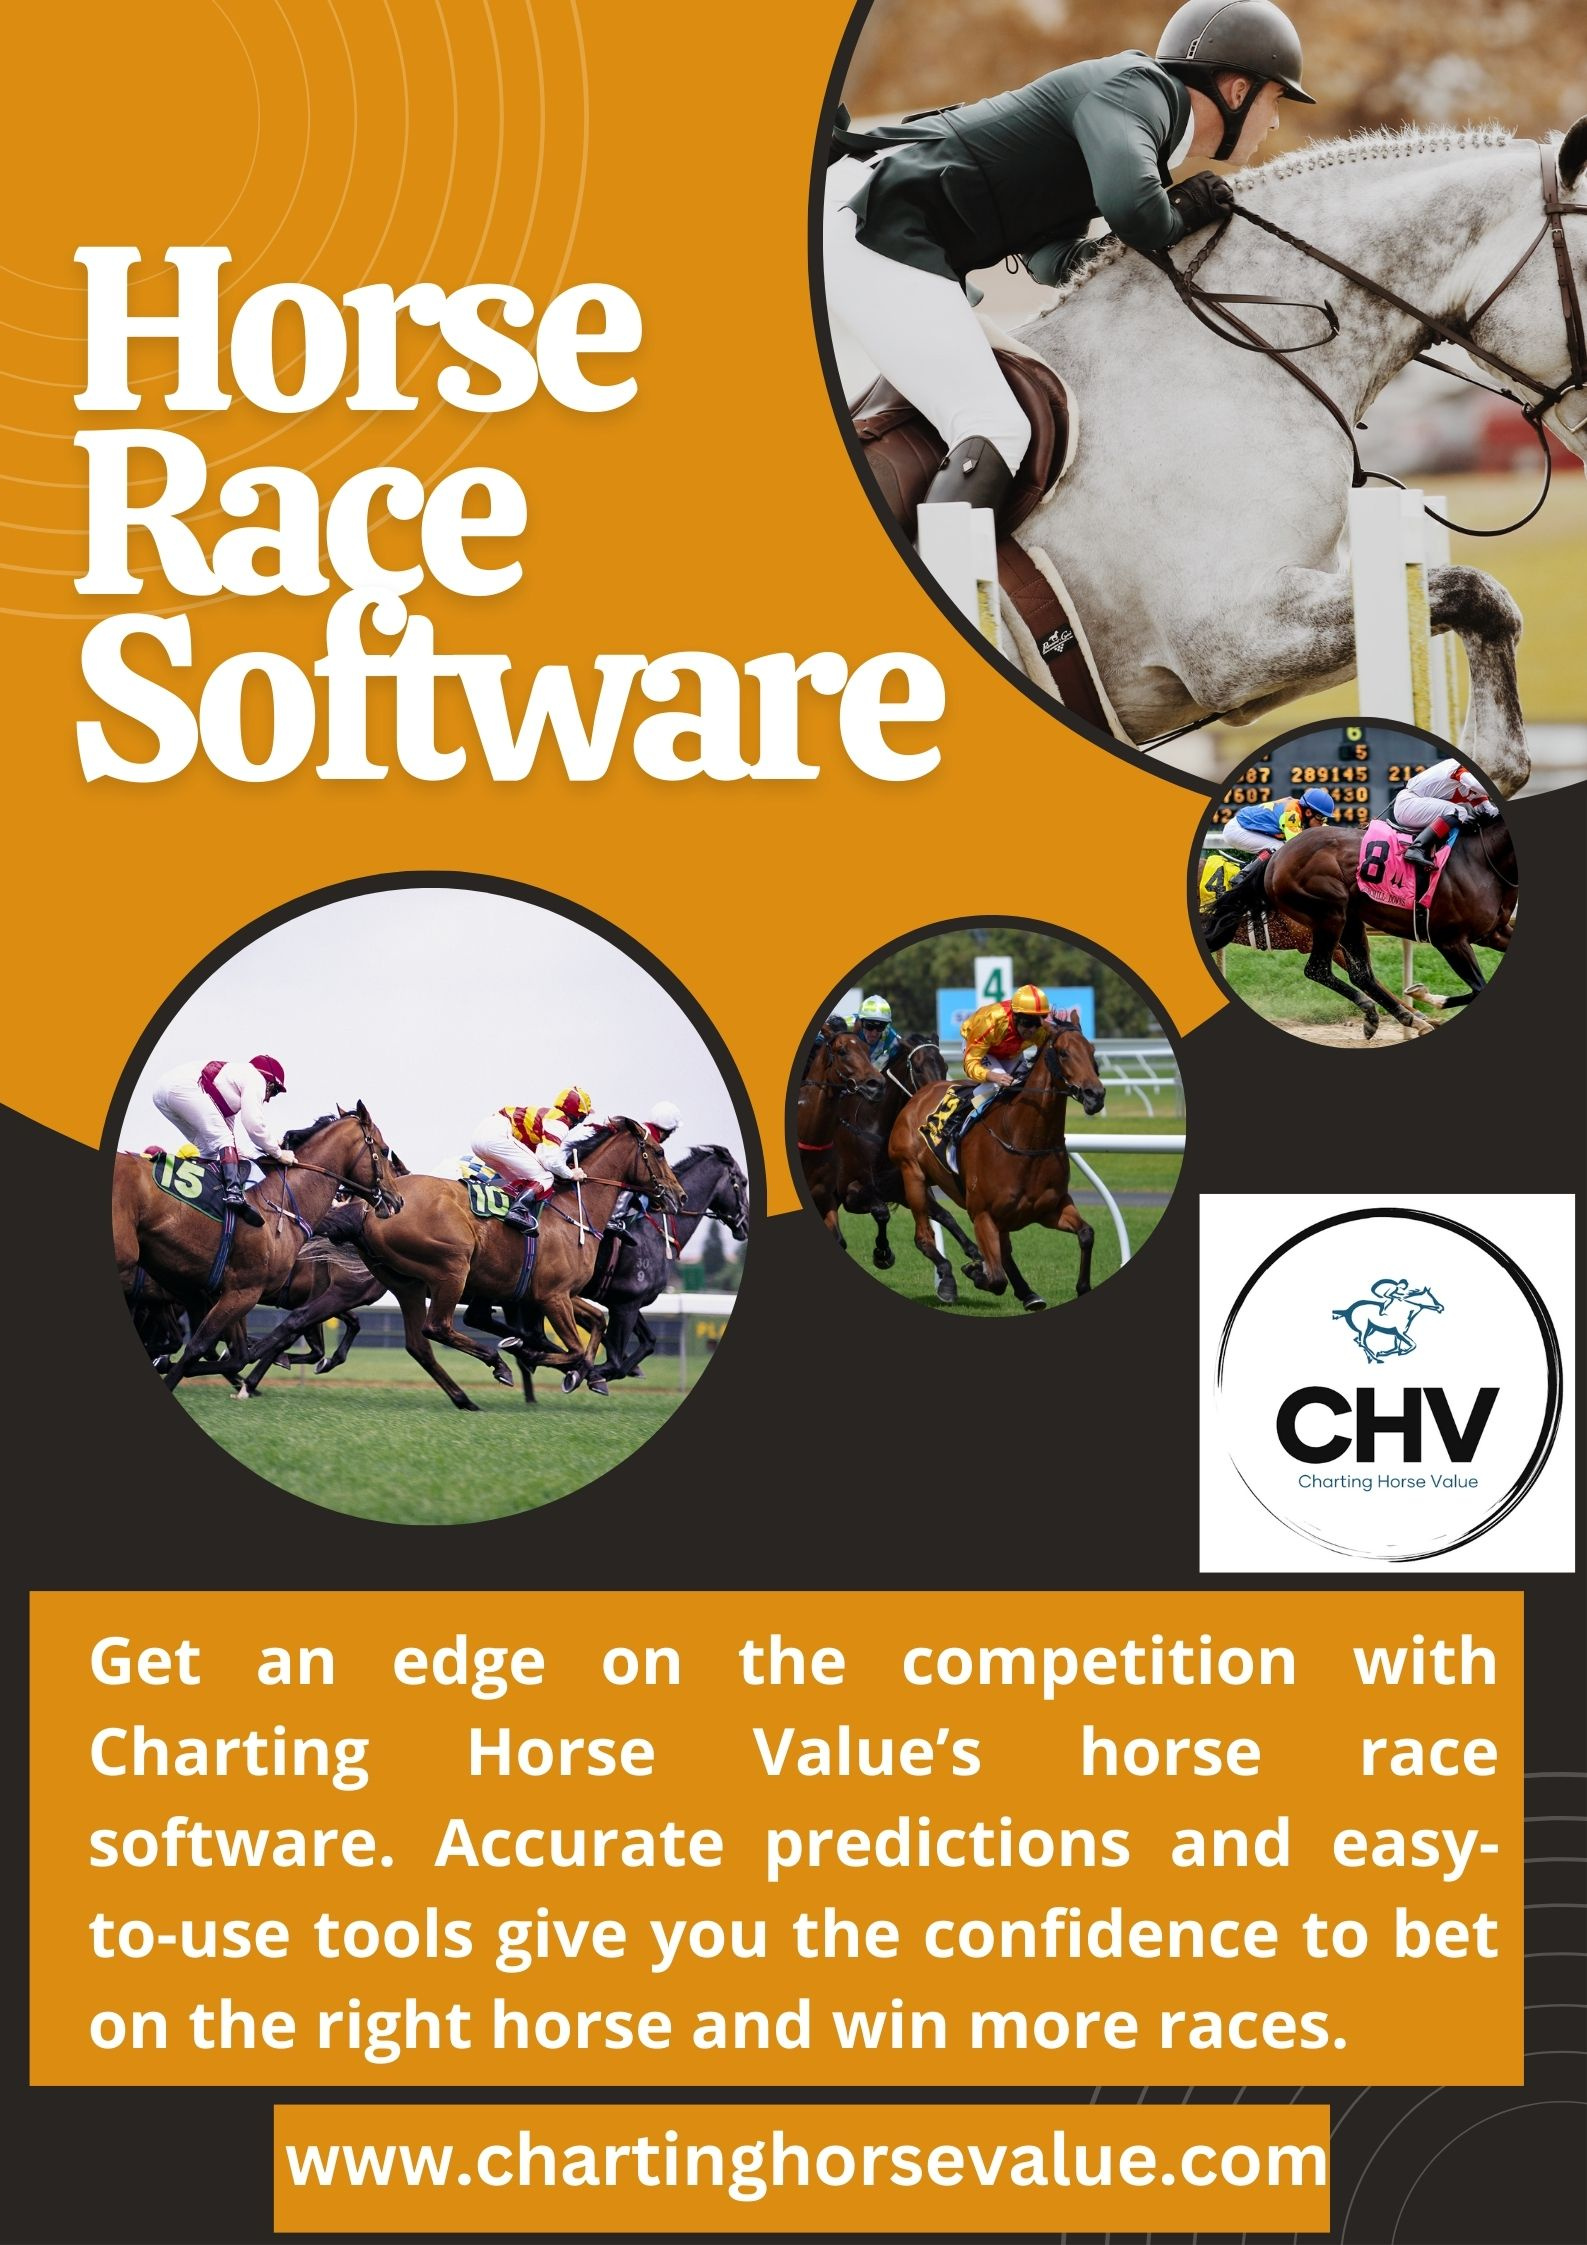 Win More Races with Charting Horse Value’s Race Software by Charting